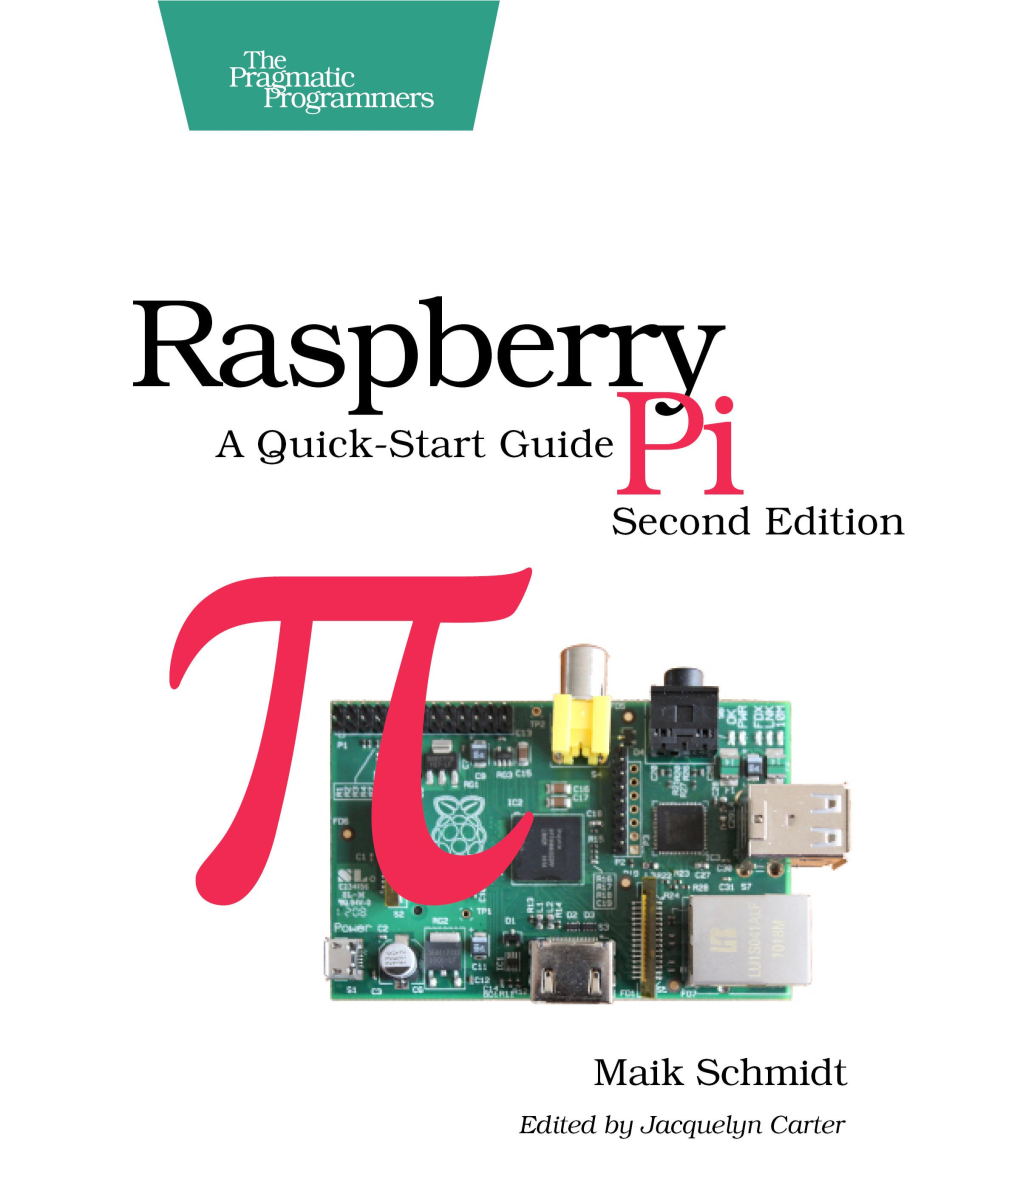 Where Can I Get a Raspberry Pi and Additional Hardware? • Xiii